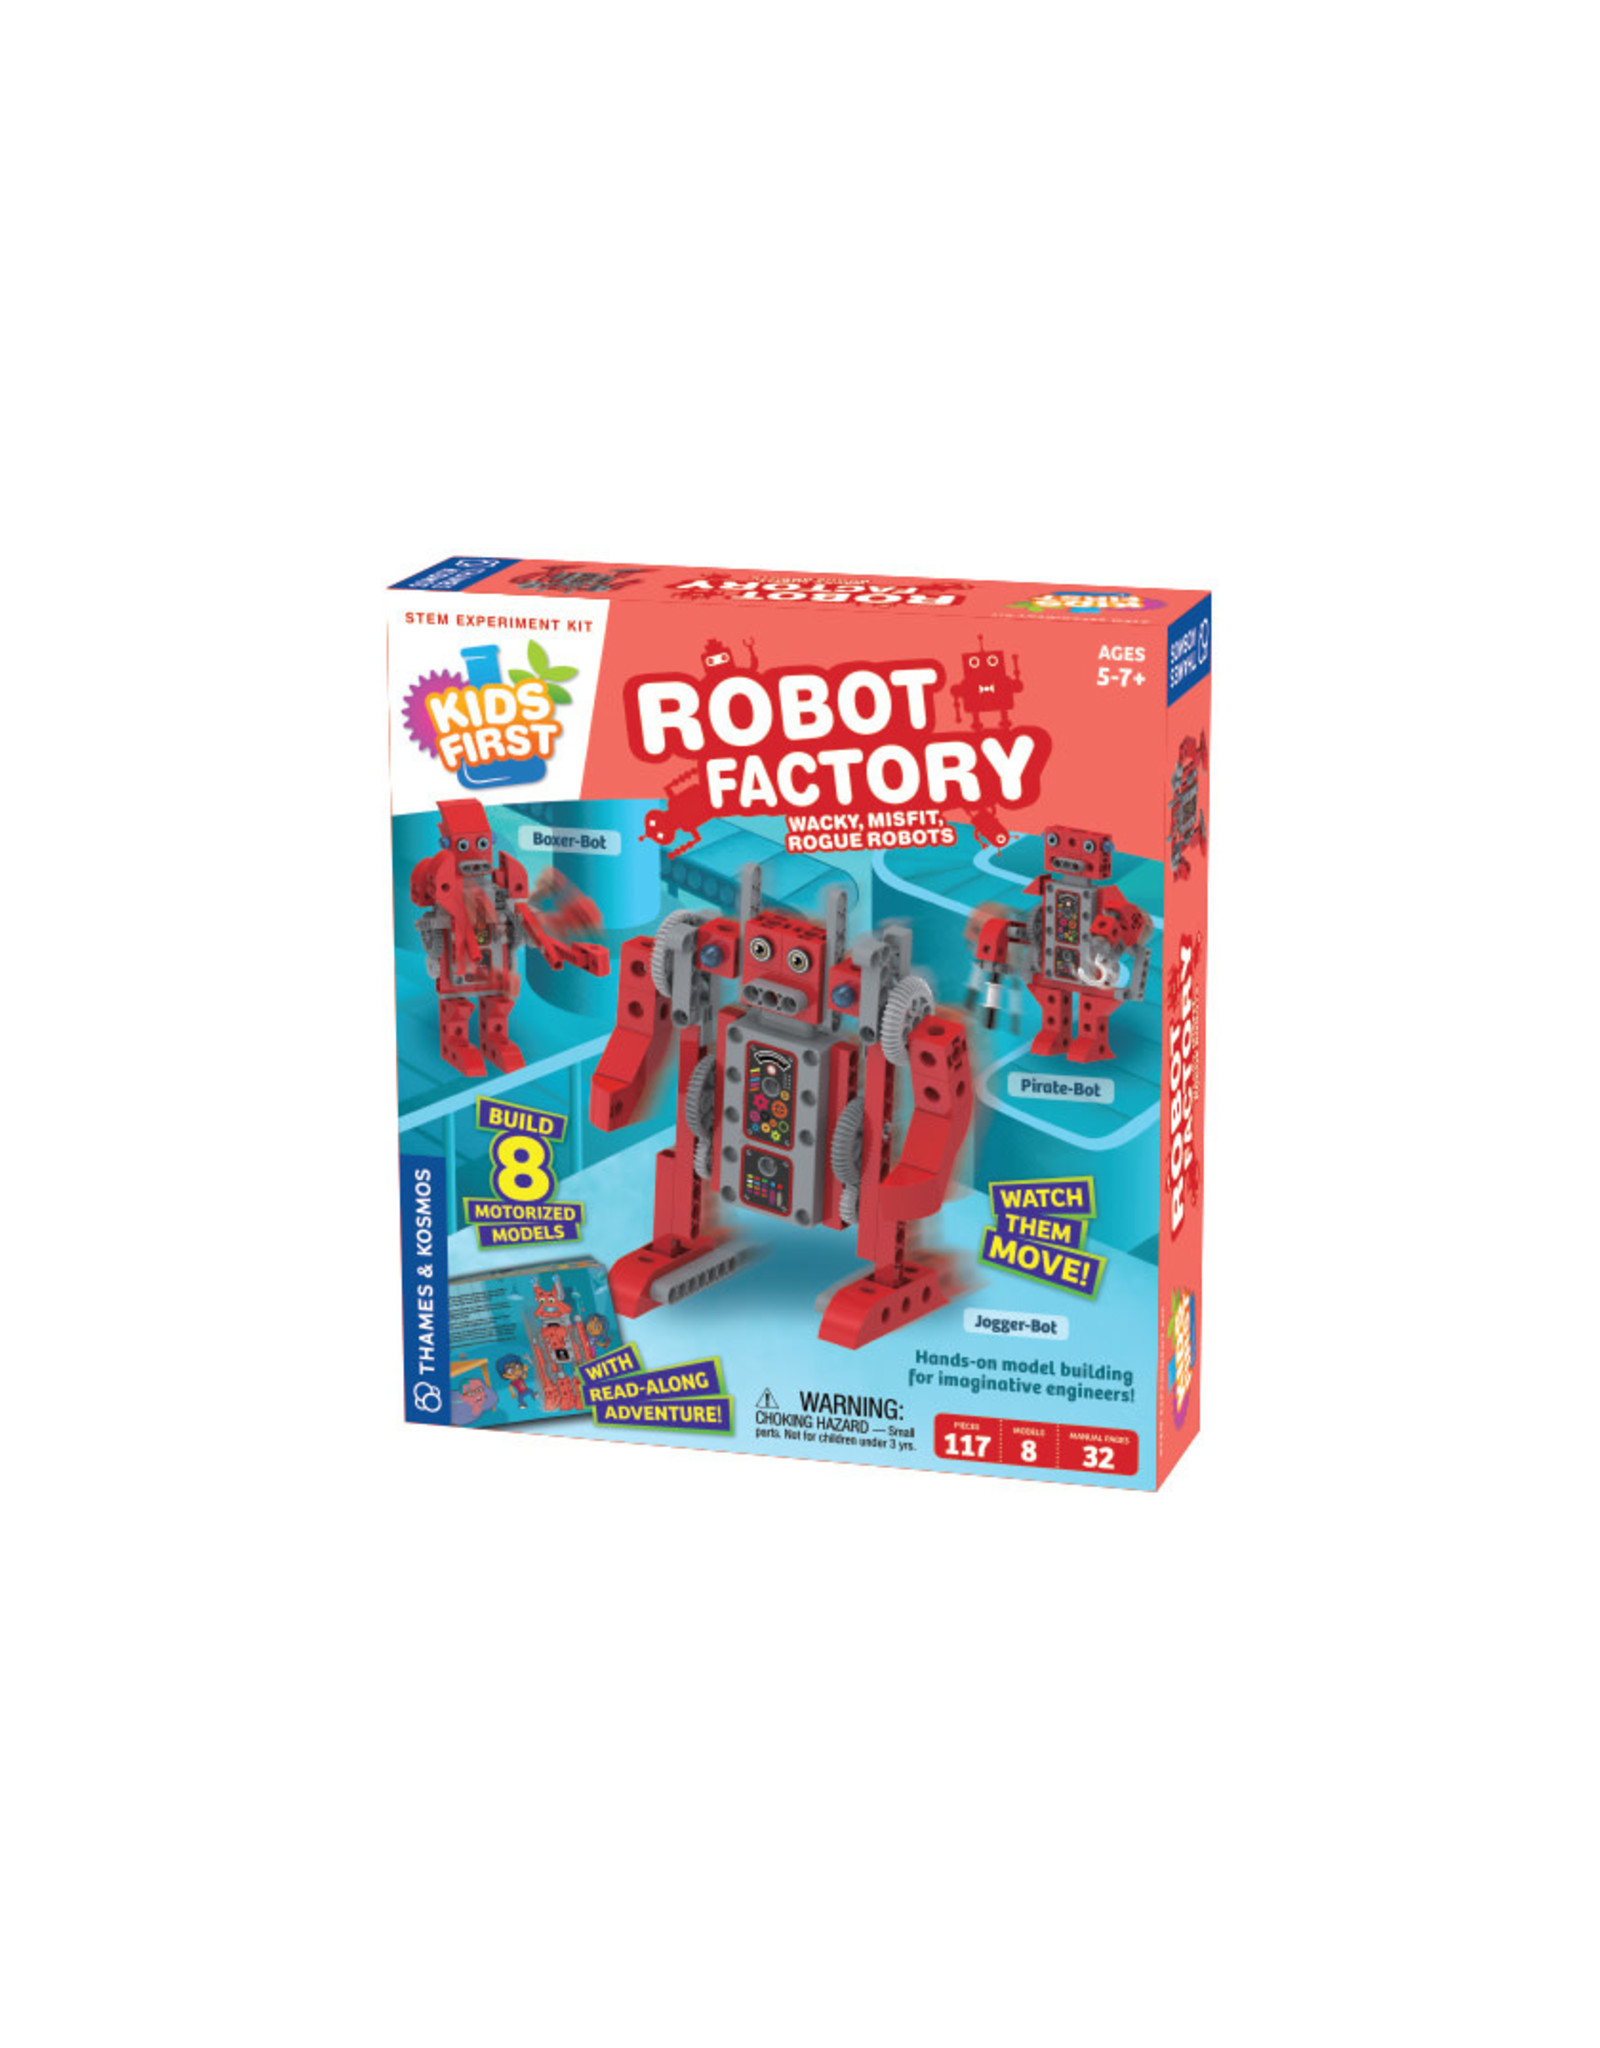 Kids First Robot Factory from Toy Market - Toy Market